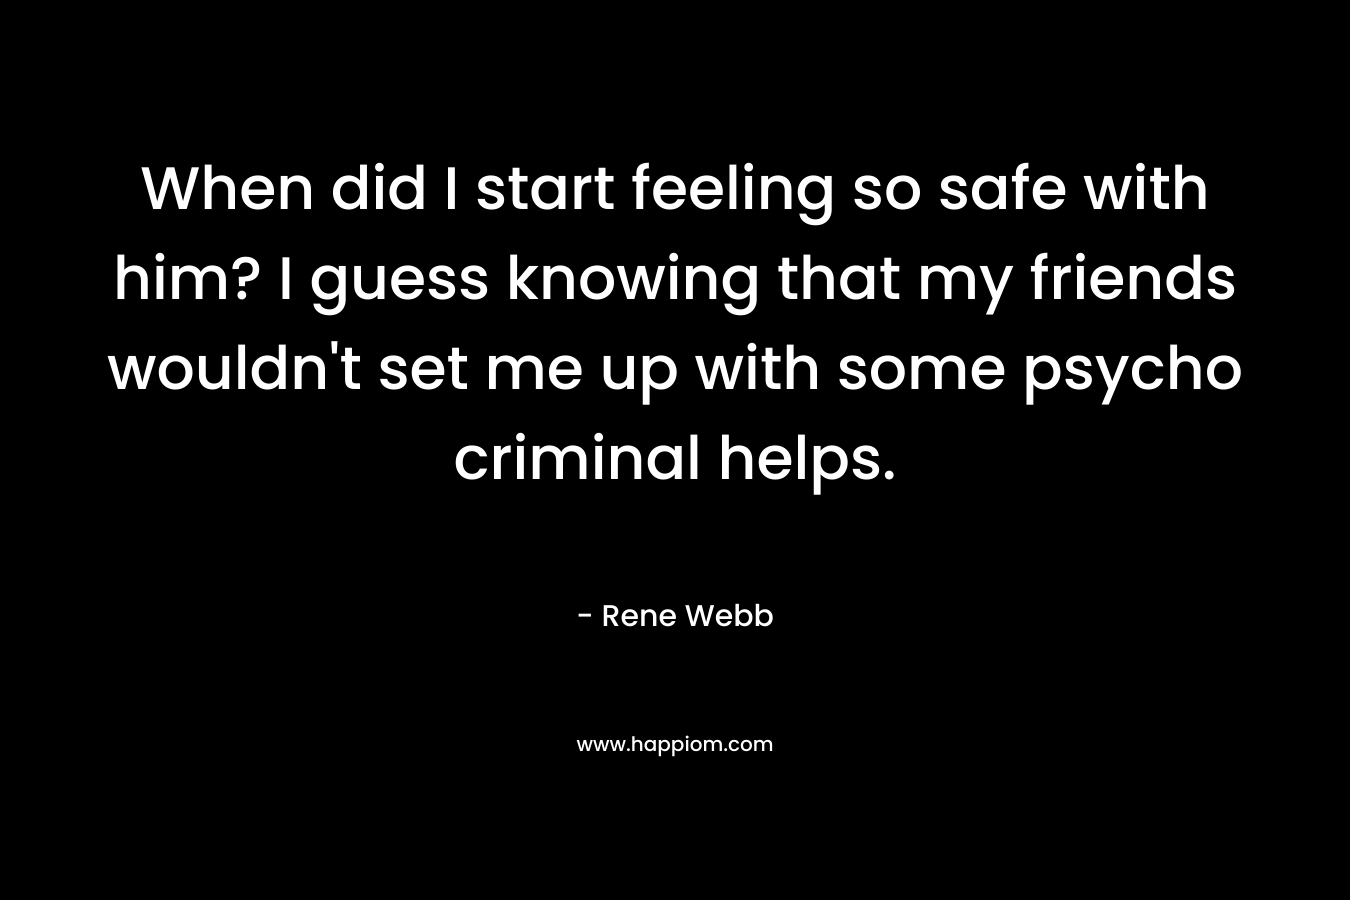 When did I start feeling so safe with him? I guess knowing that my friends wouldn’t set me up with some psycho criminal helps. – Rene Webb